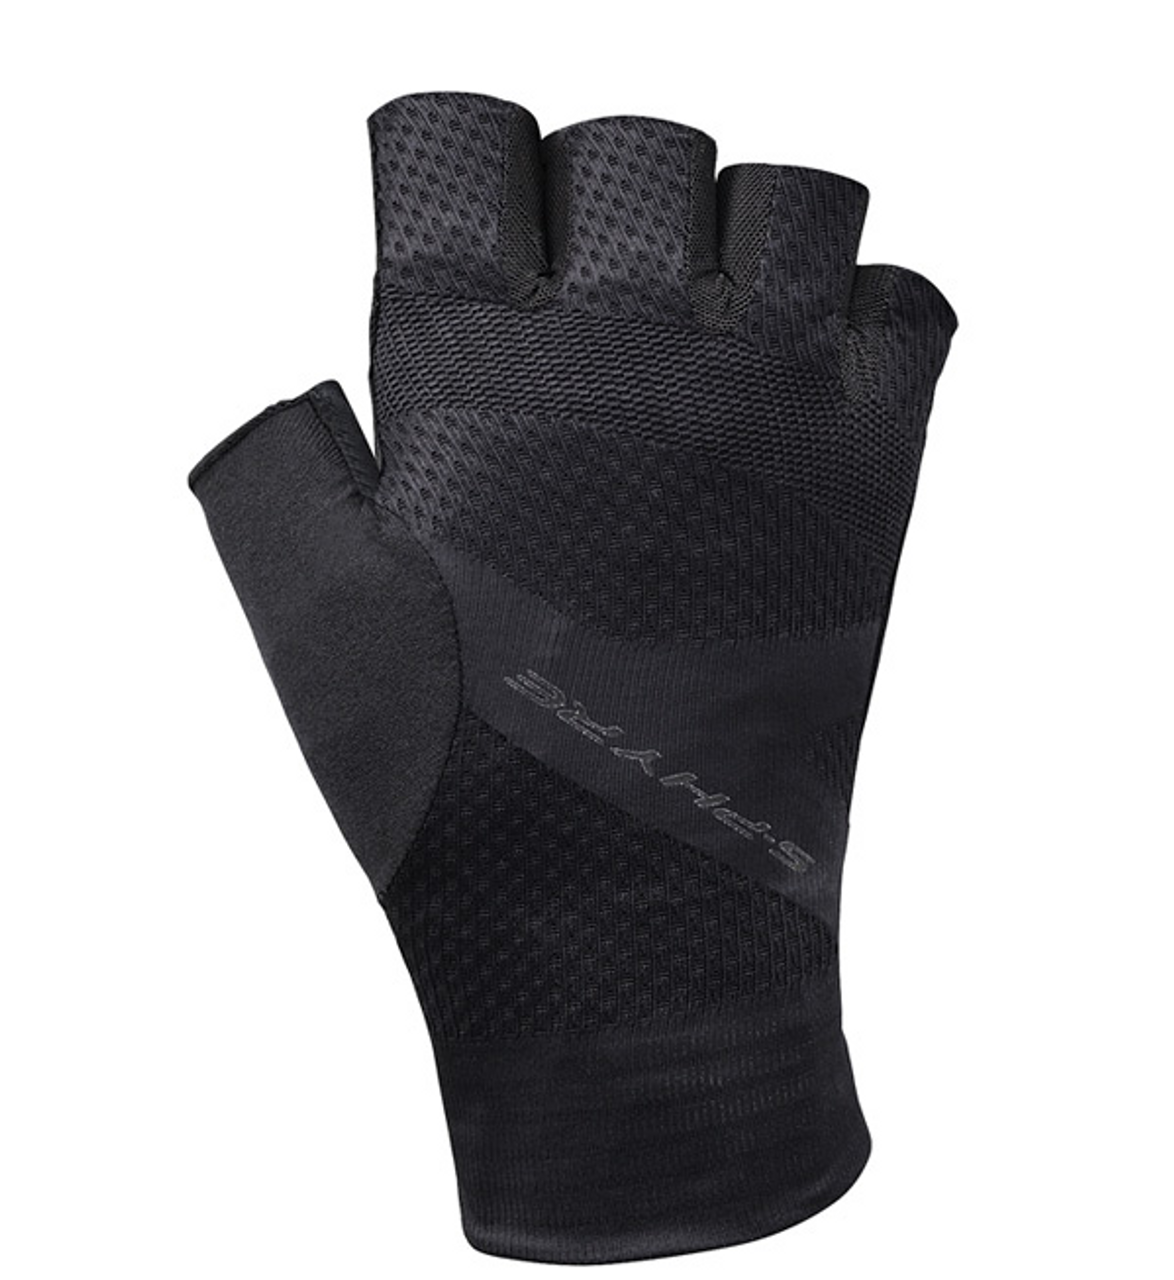 Shimano Men's S-PHYRE Cycling Gloves In Black All Sizes RRP £69.99